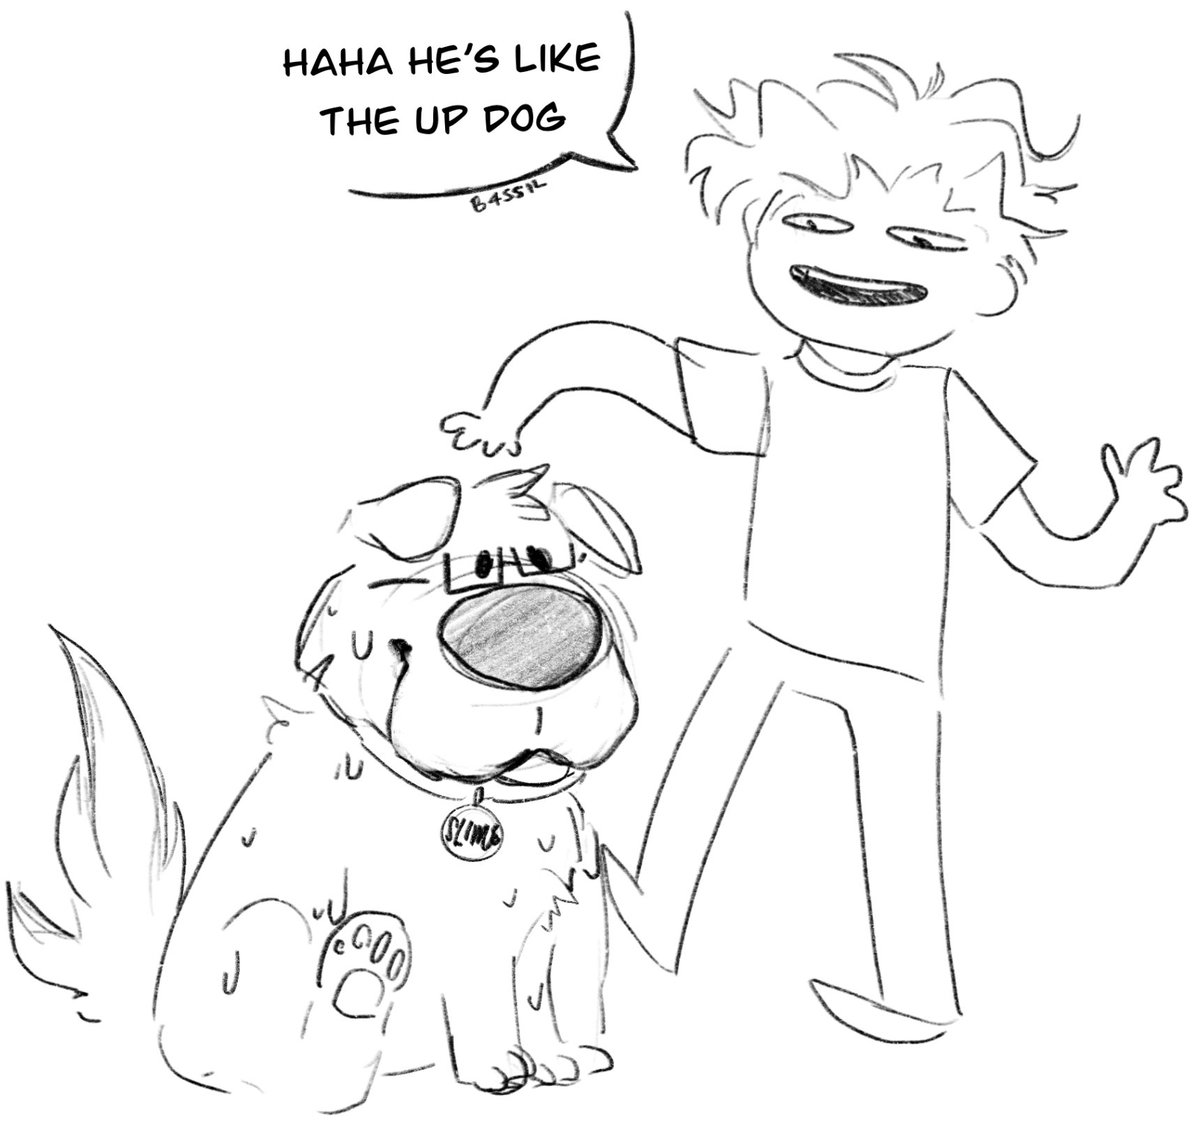 okay one more from tommys stream,,,, Charlie really is the same as him 

#Tommy 